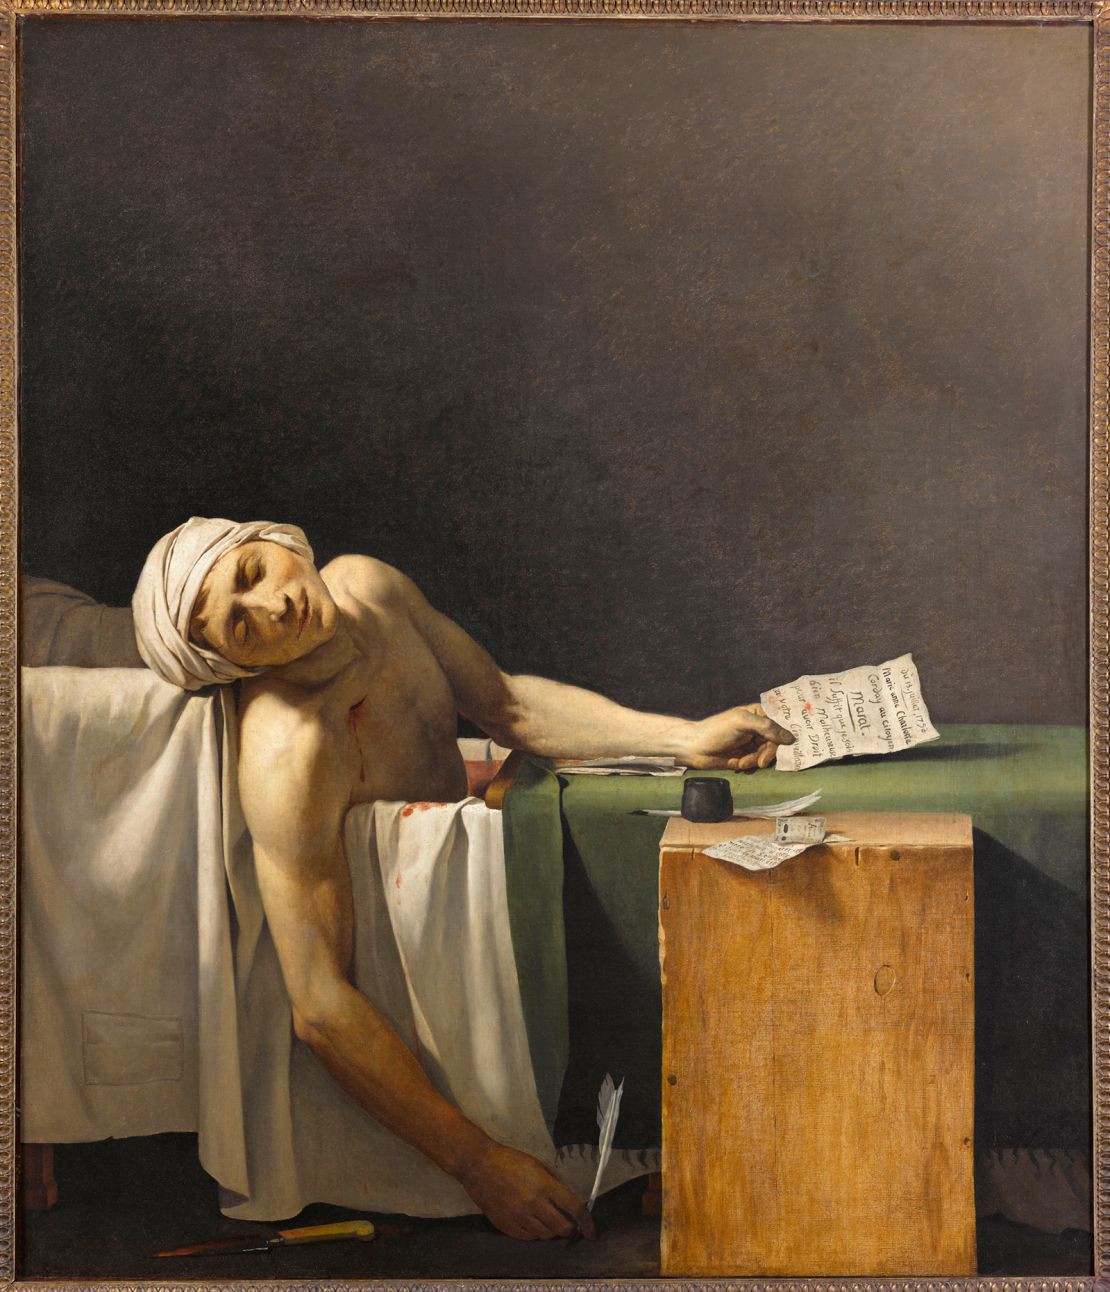 "In the eyes of the revolutionaries, Marat immediately became a martyr of freedom after his assassination," writes Alain Chevalier in "Body. Gaze. Power." "Rather than hide the circumstances of his death, they chose to glorify them."